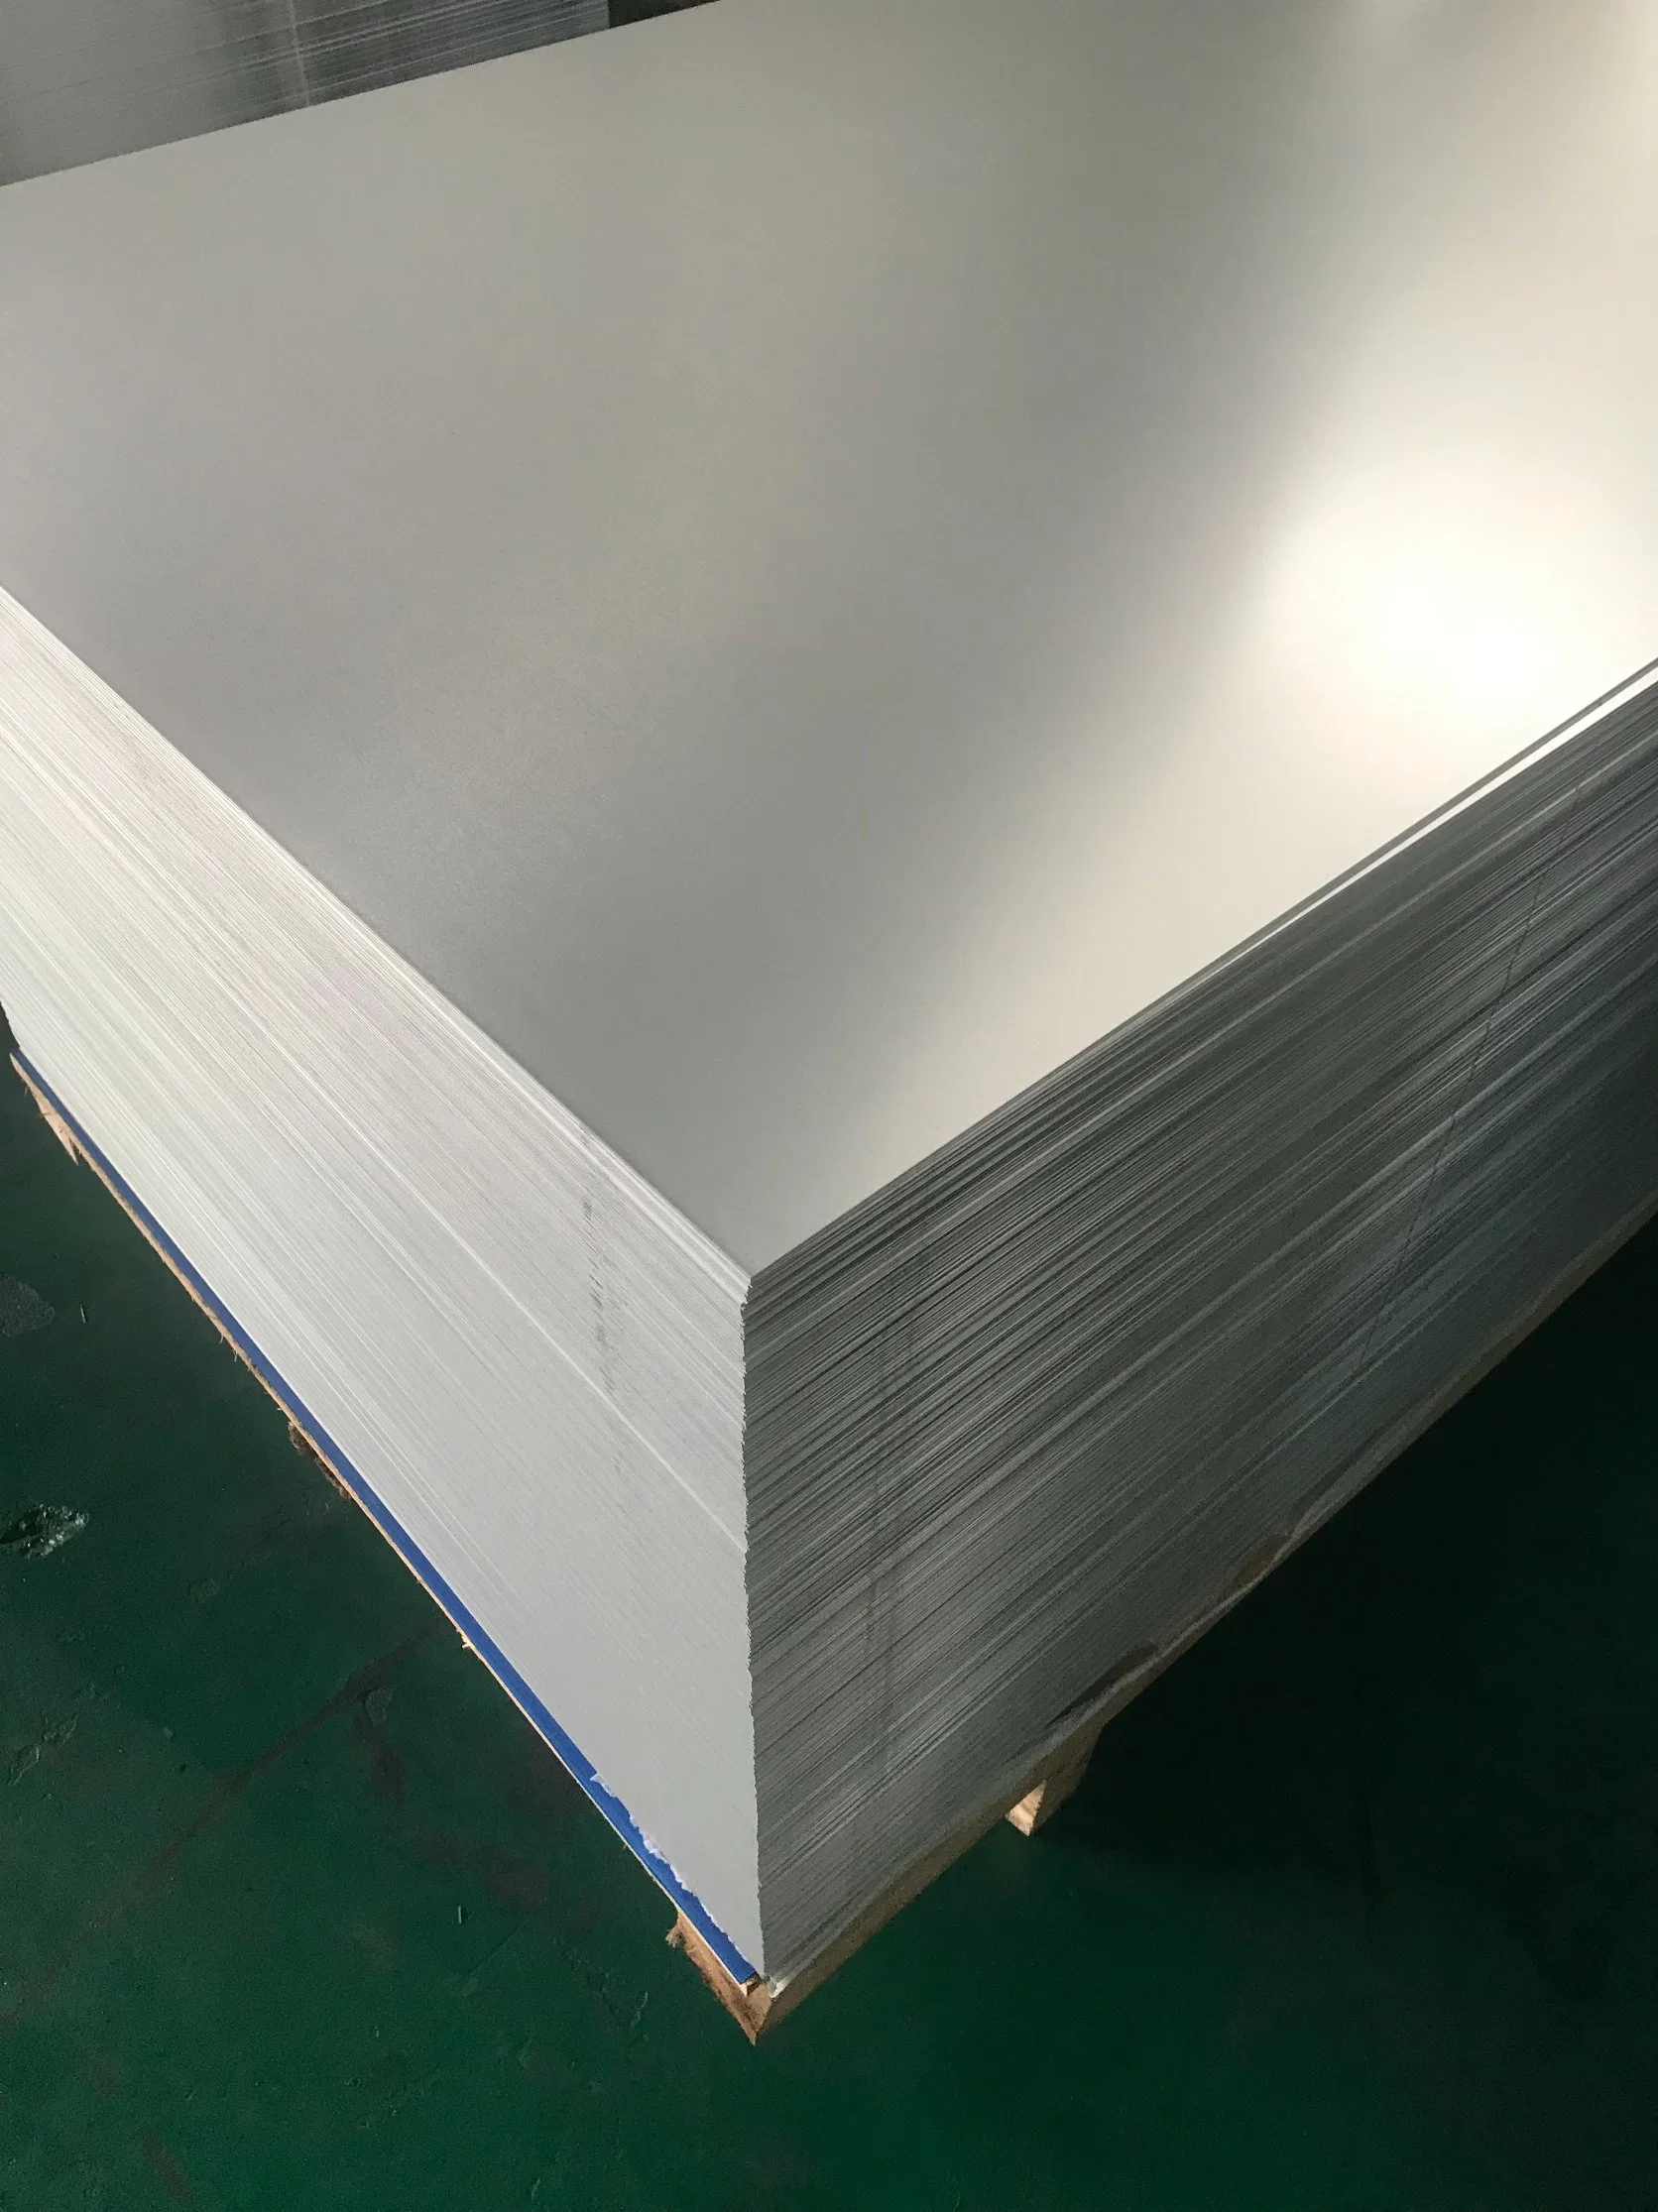 Best Price 5083h32 Plain Alloy Aluminium Sheet 1xxx 99.99 Purity Plates3xxx Factory Diamond 3&5bars Embossed Checkered Chequered Color Coated Raw Aluminum Sheet